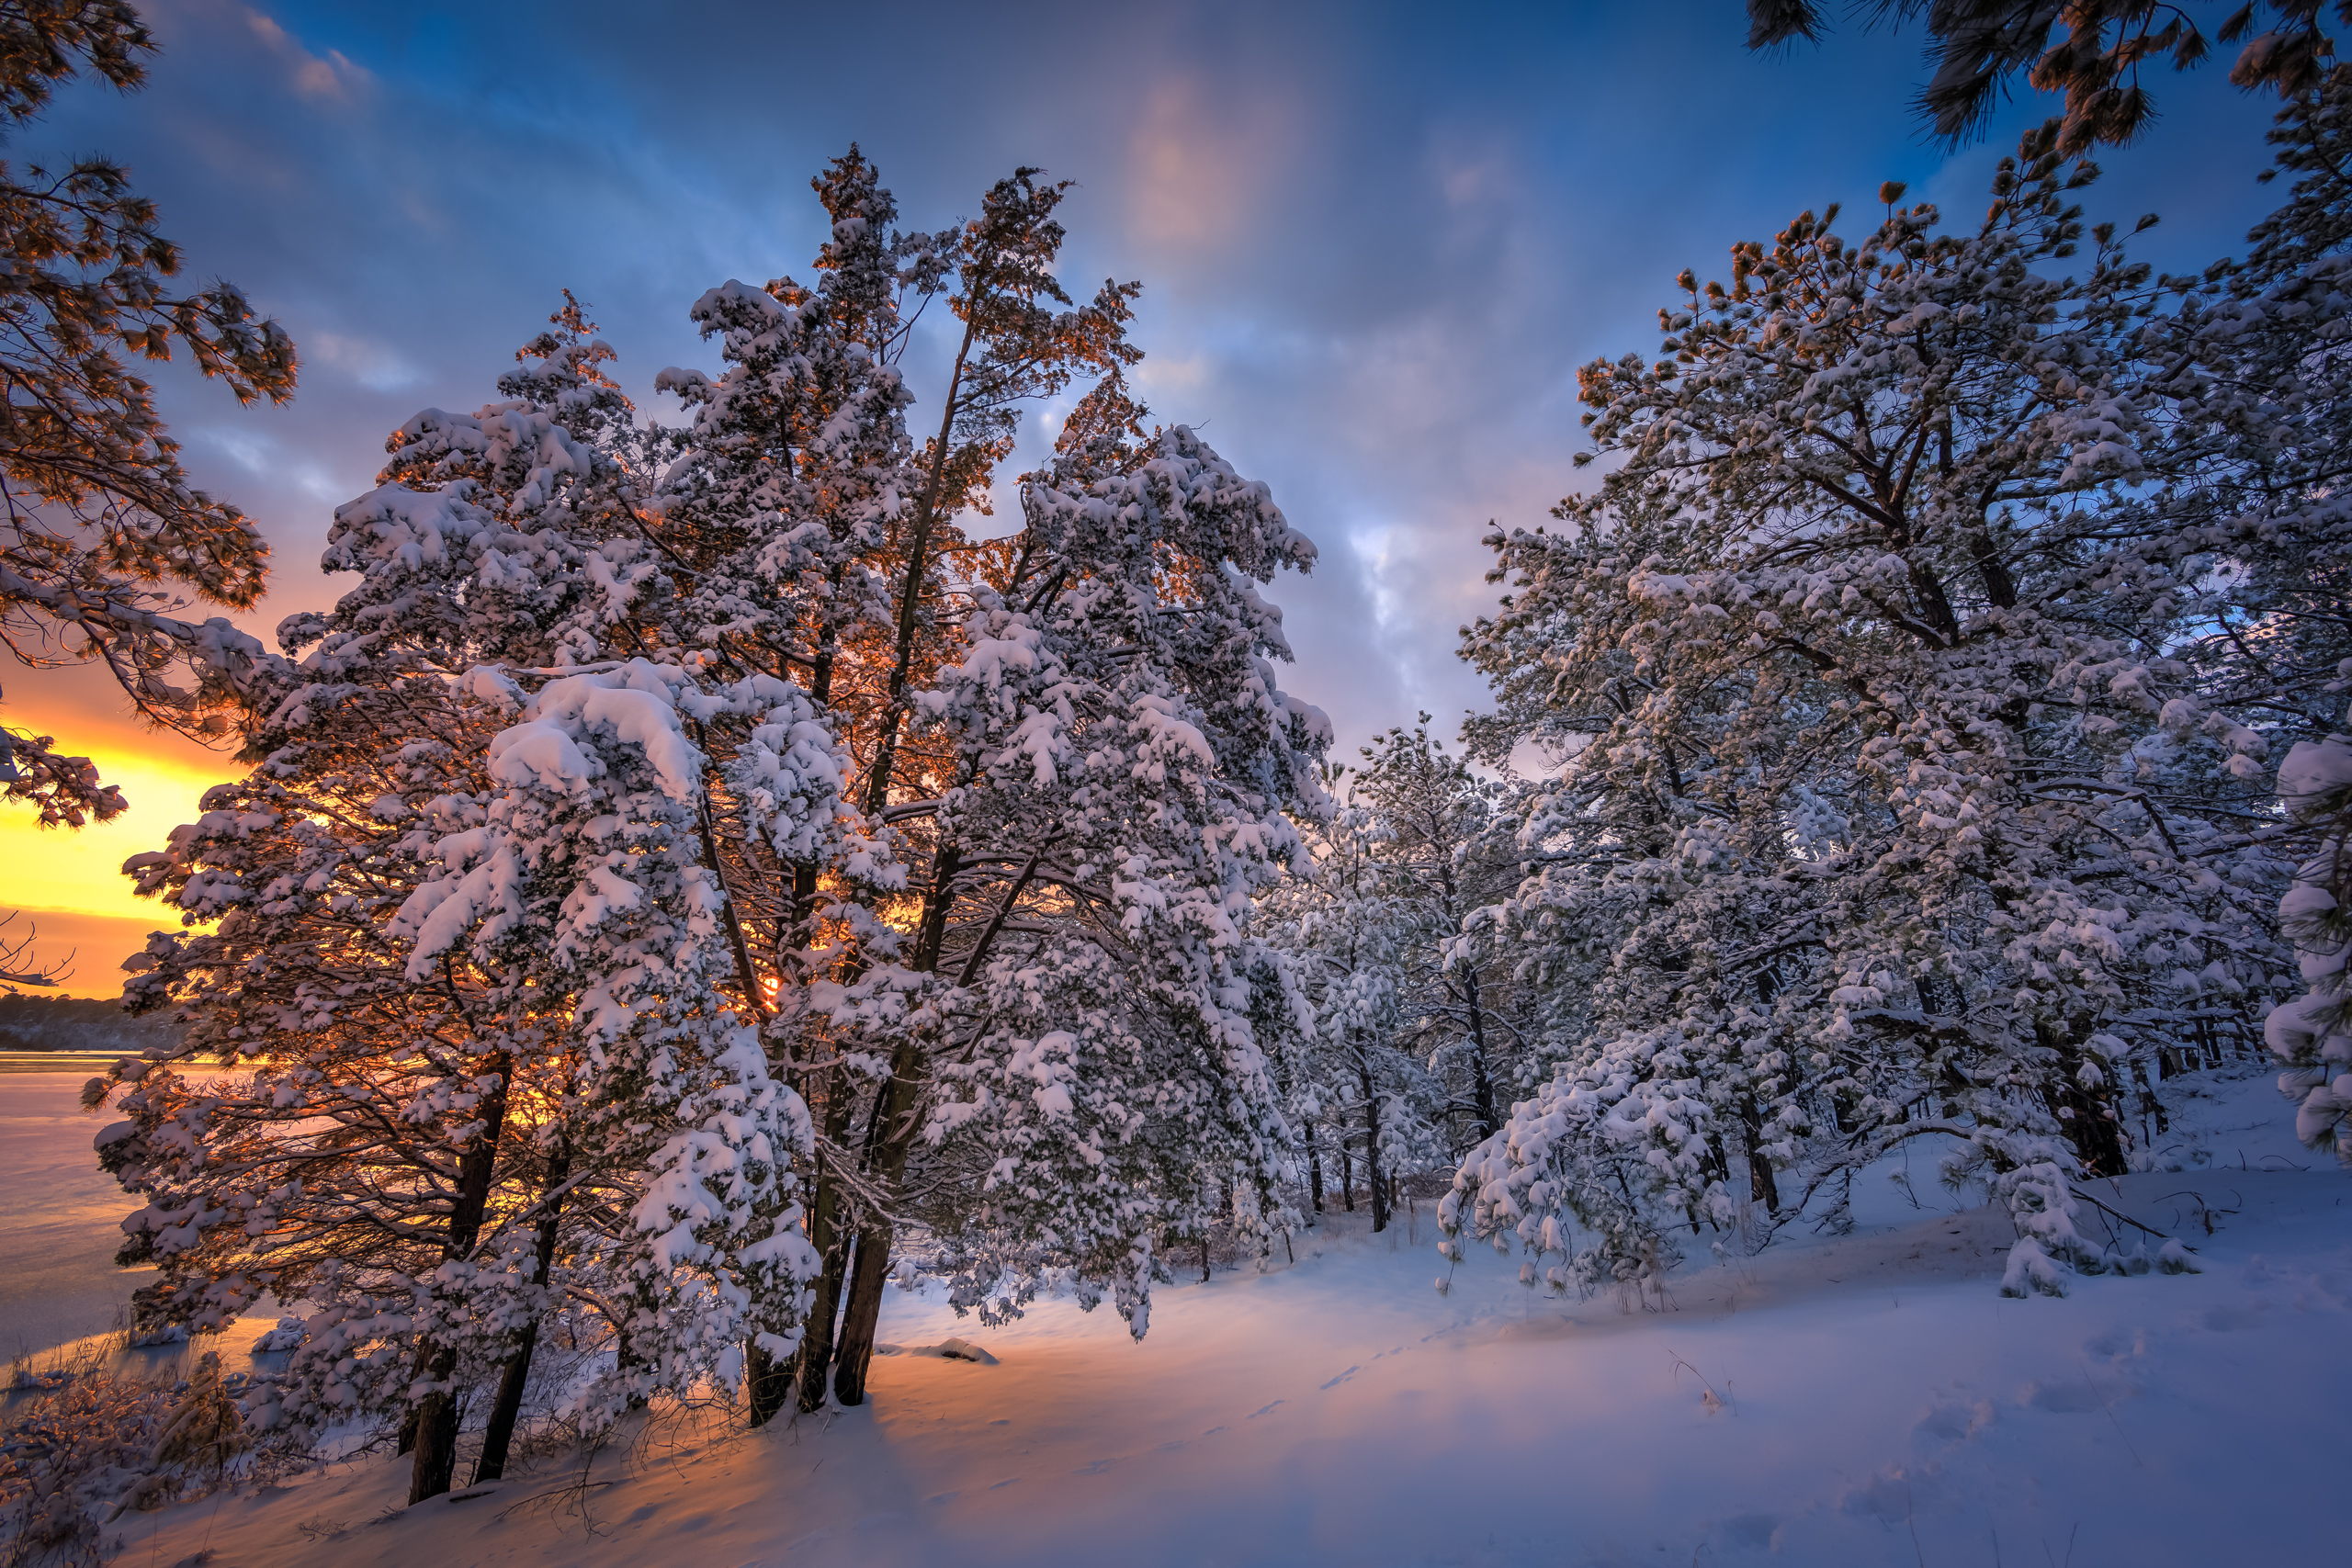 An HDR photograph of winter in the Pinelands: fresh fallen snow, numerous pitch pines, footprints and lively golden light make the scene